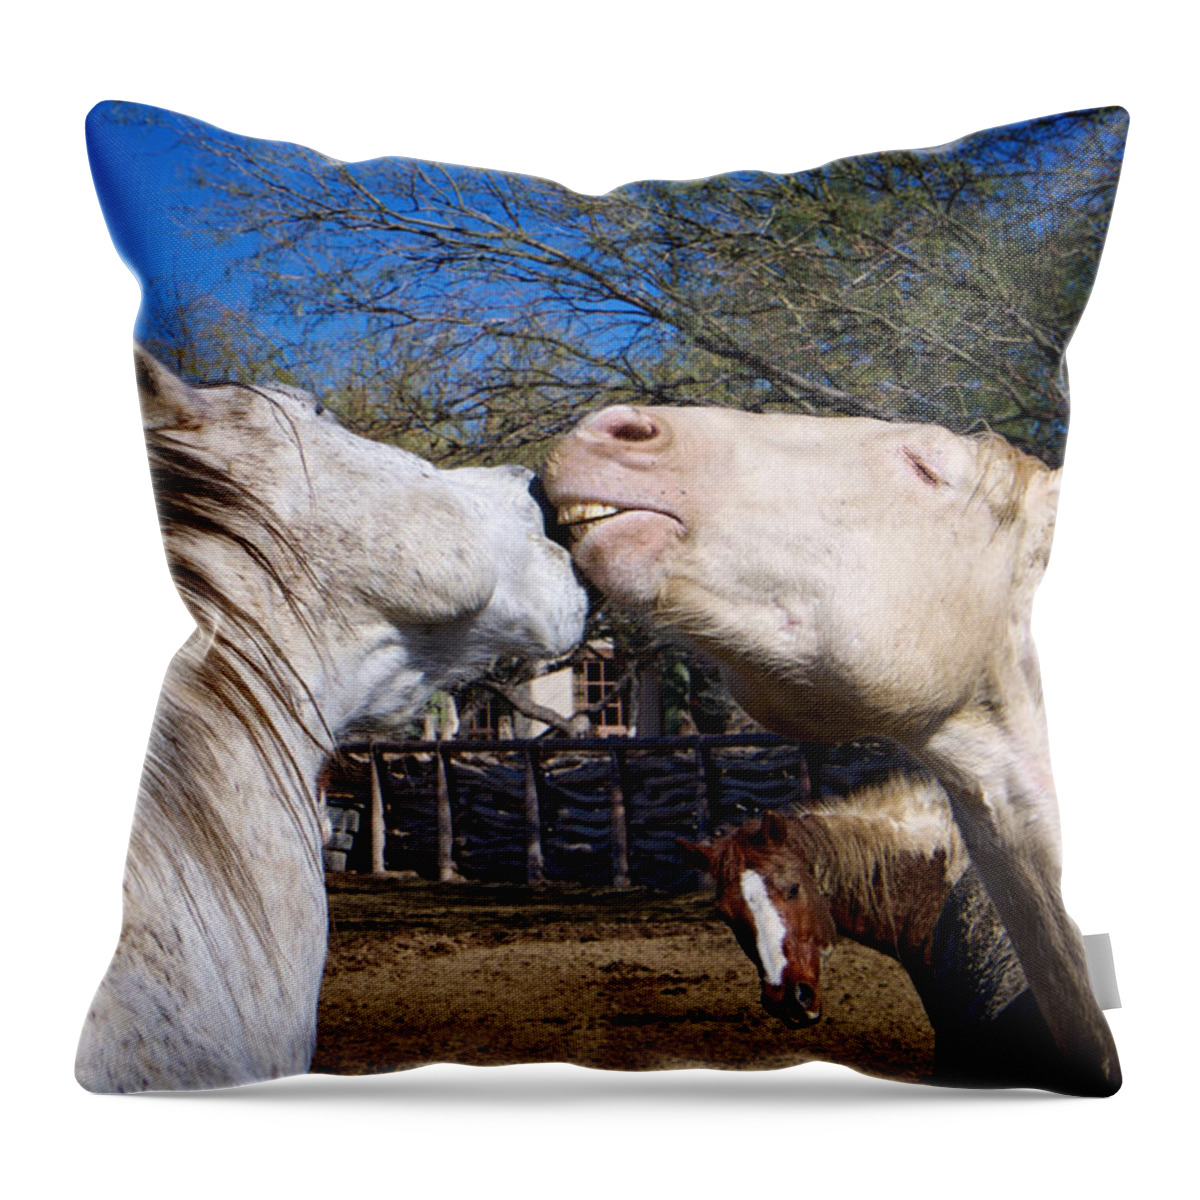 Animals Throw Pillow featuring the photograph Horse Emotion by Mary Lee Dereske